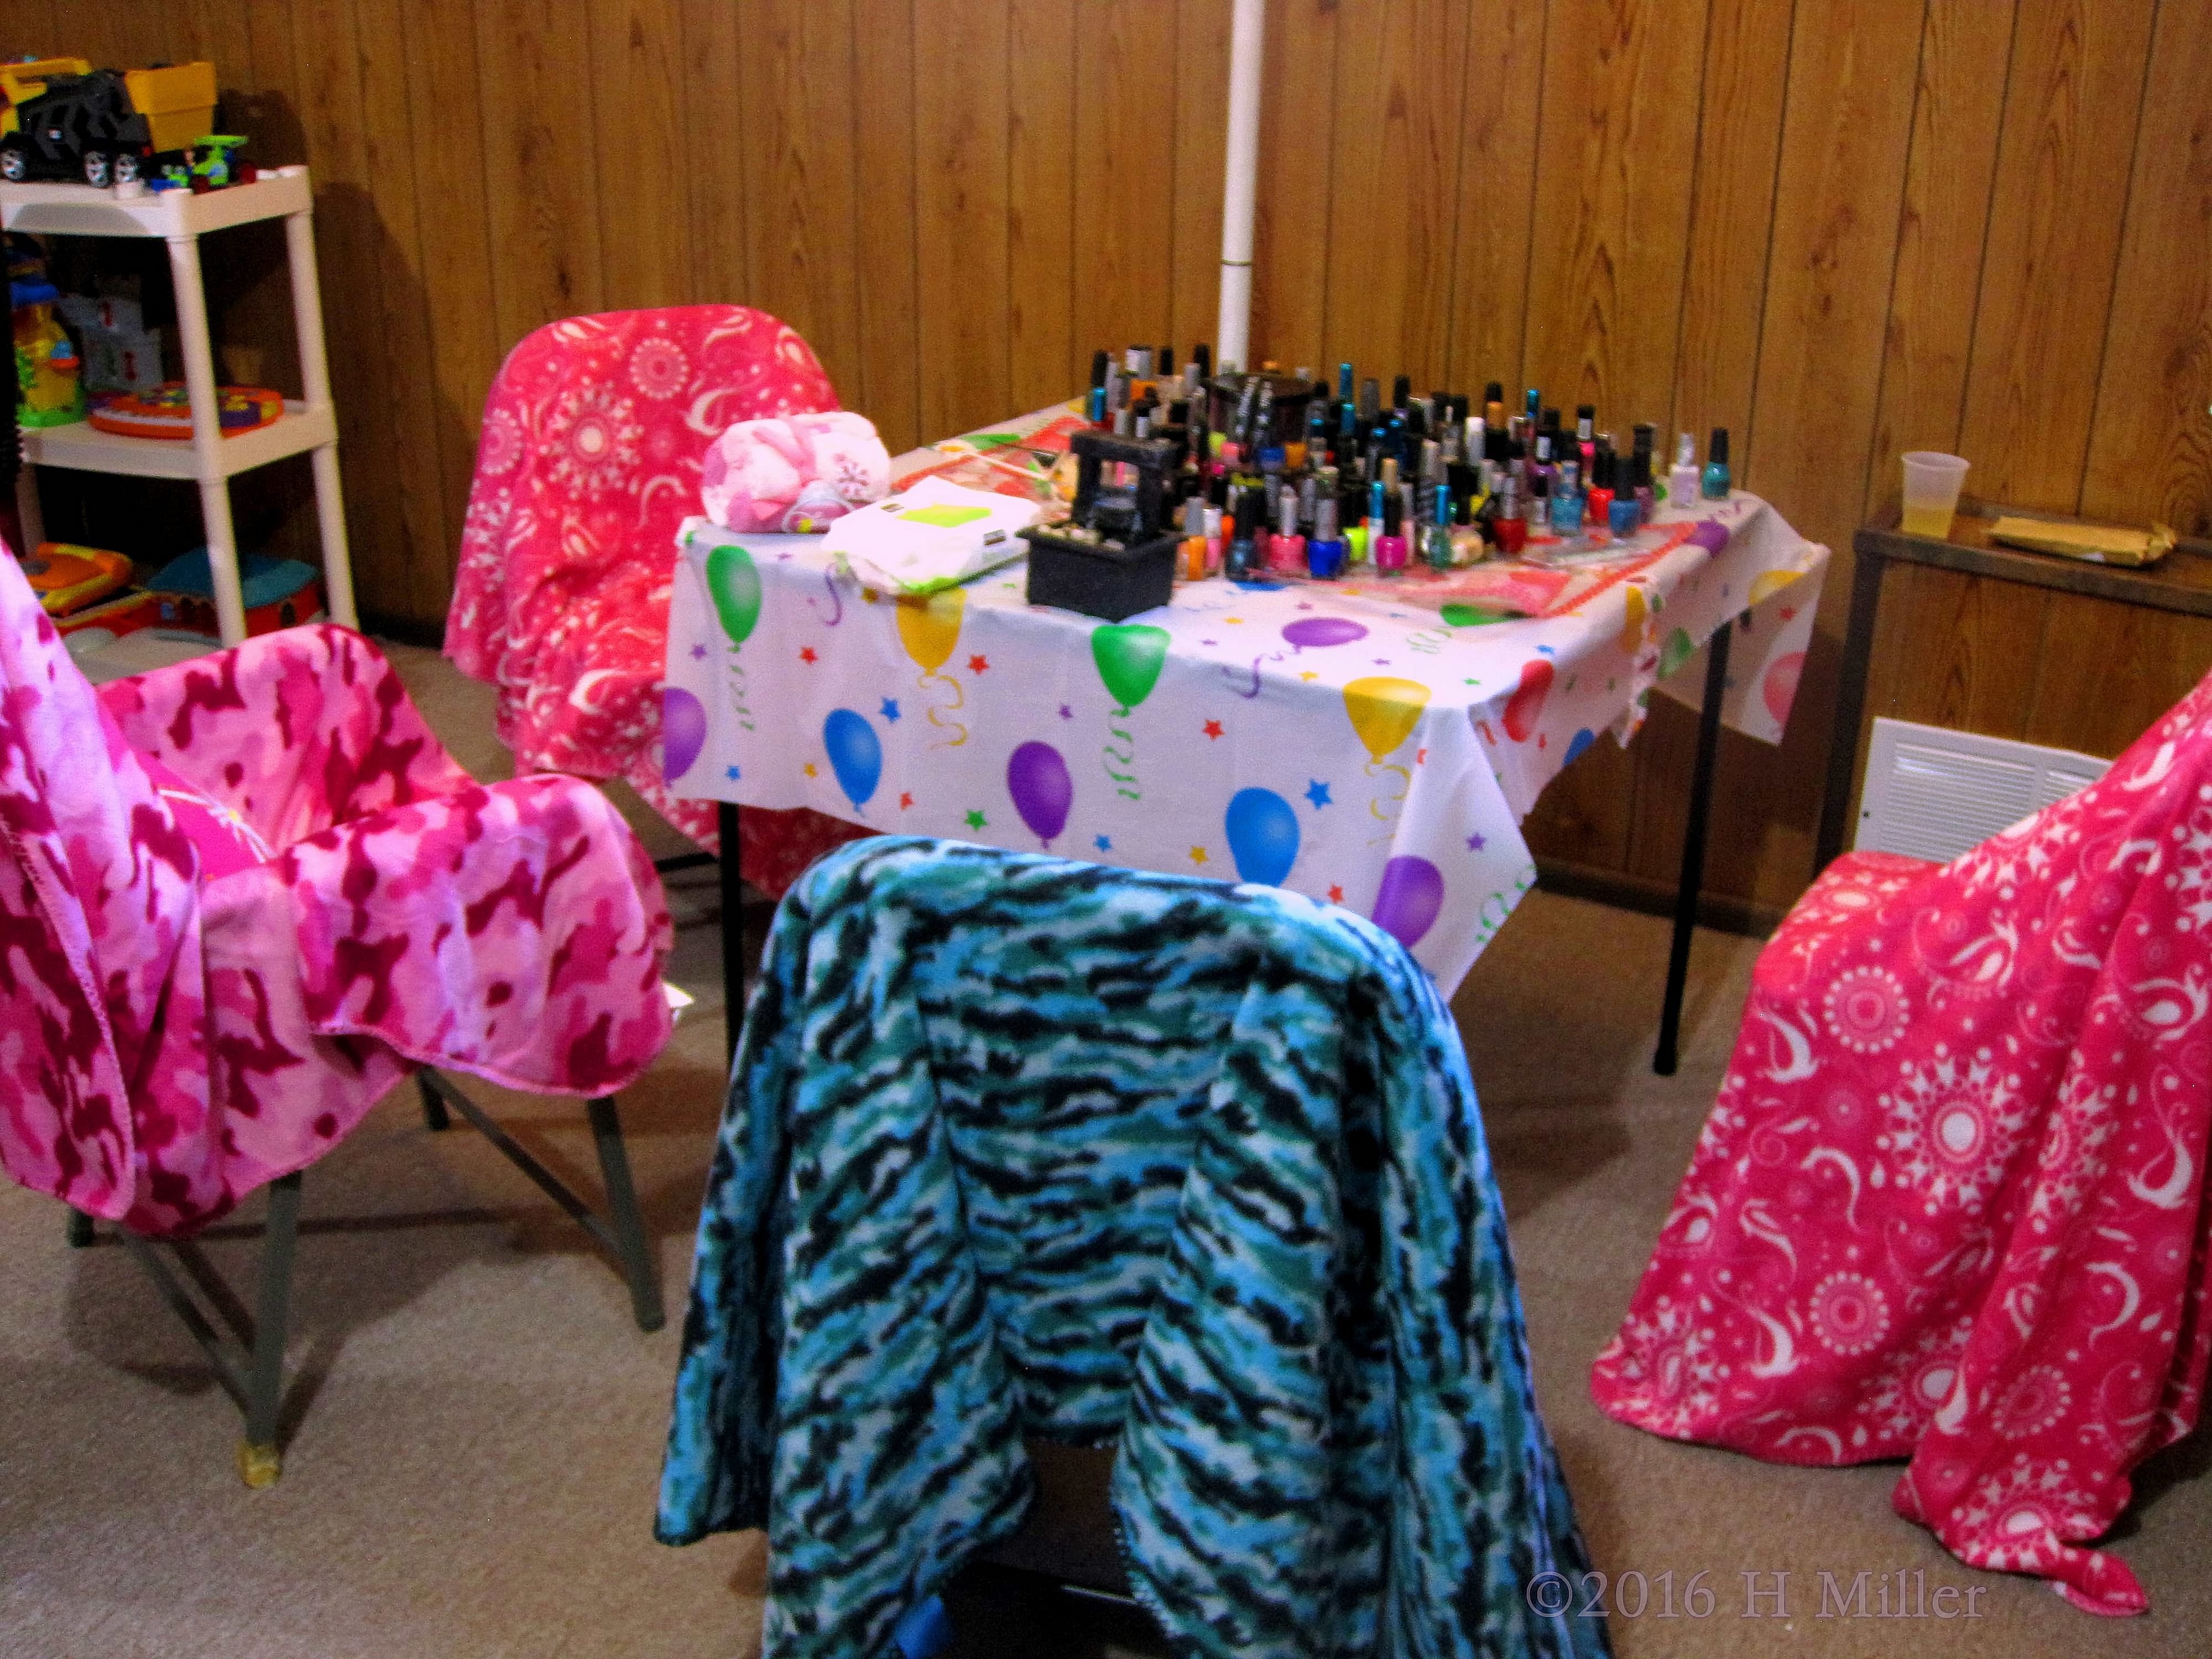 The Nail Polish Station At The Kids Spa Is All Set Up.